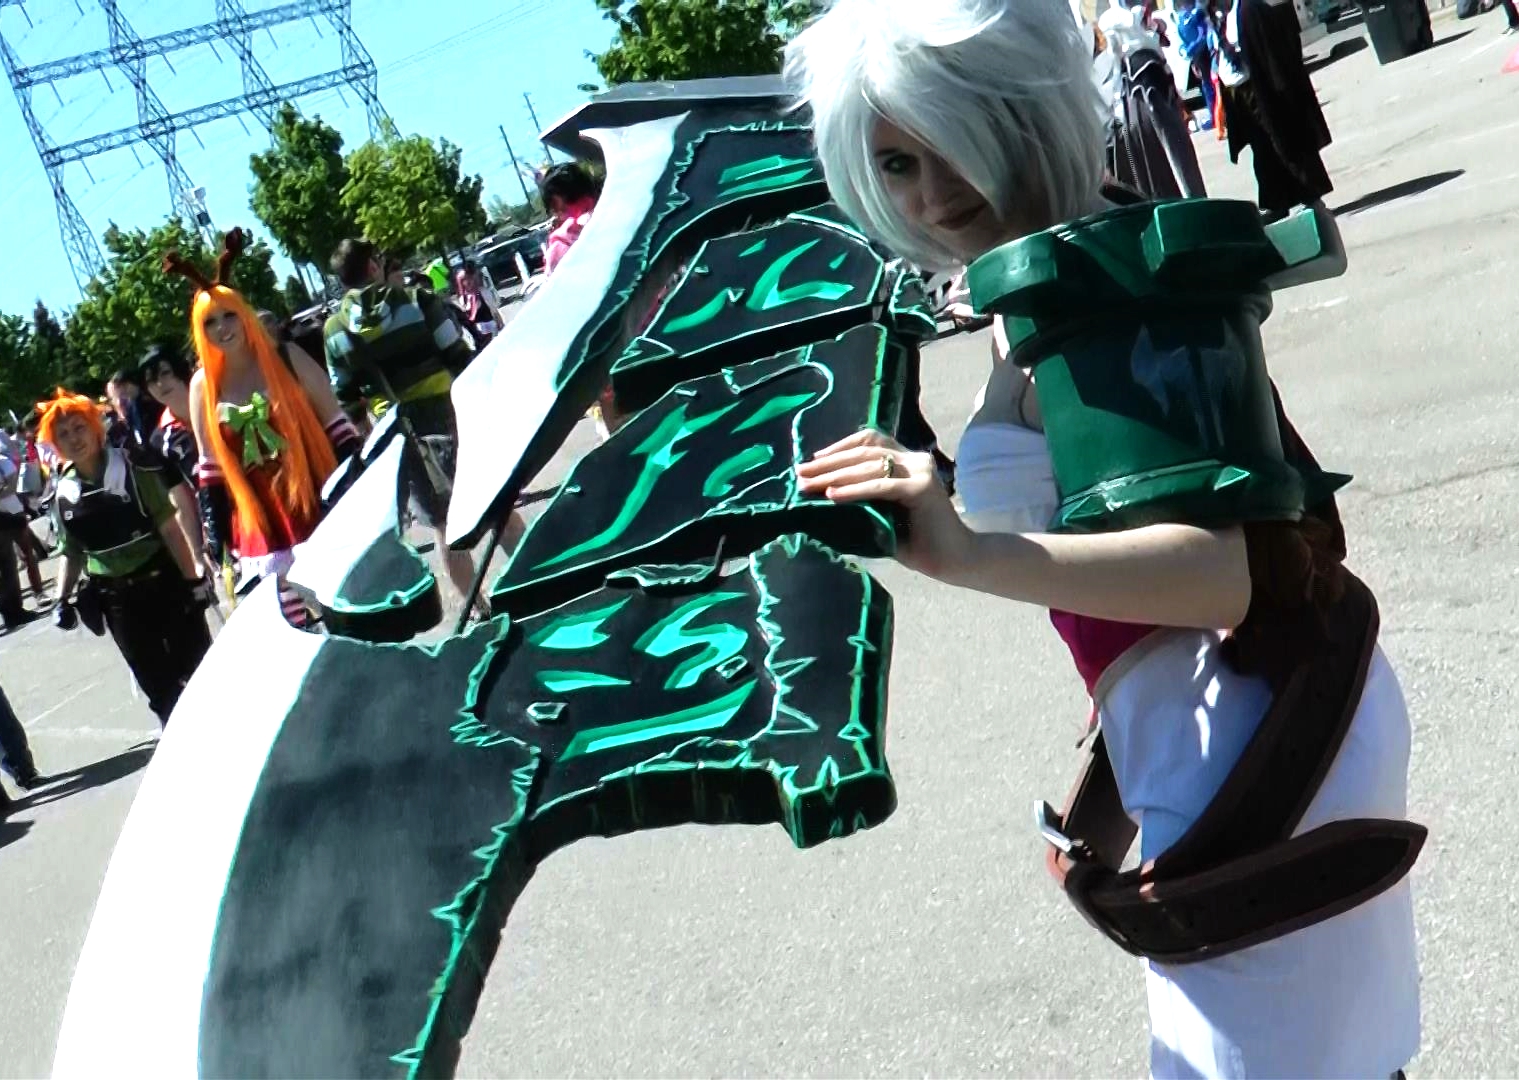  League of Legends was huge this year at Anime North. Apparently over 300 people cosplayed a character from the video game this year. Here's Riven.&nbsp;&nbsp; 